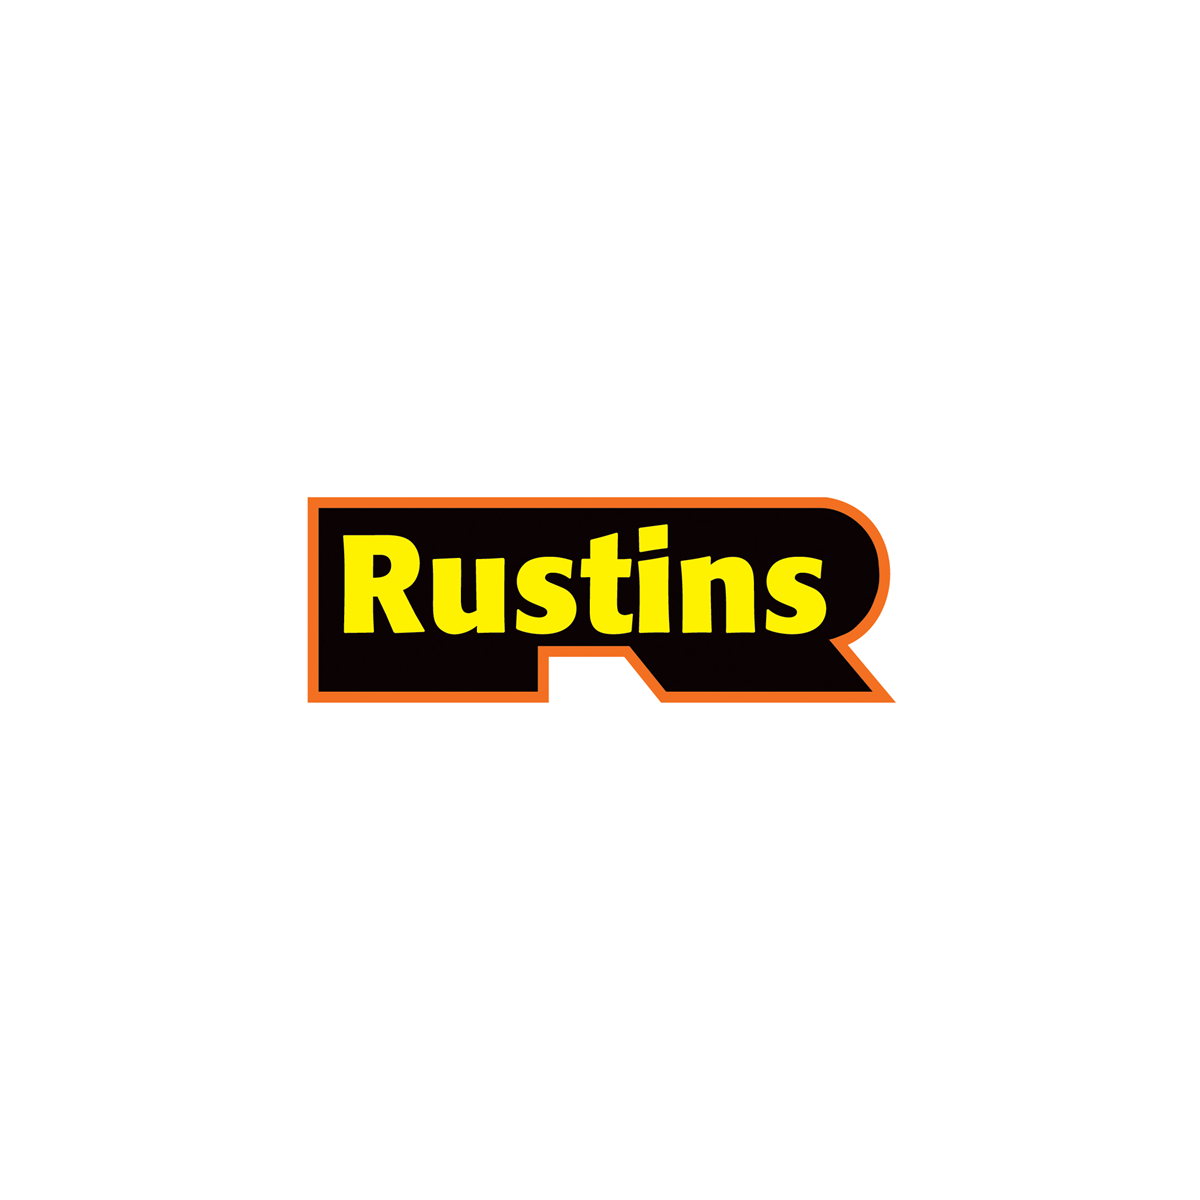 Where to Rustins Products